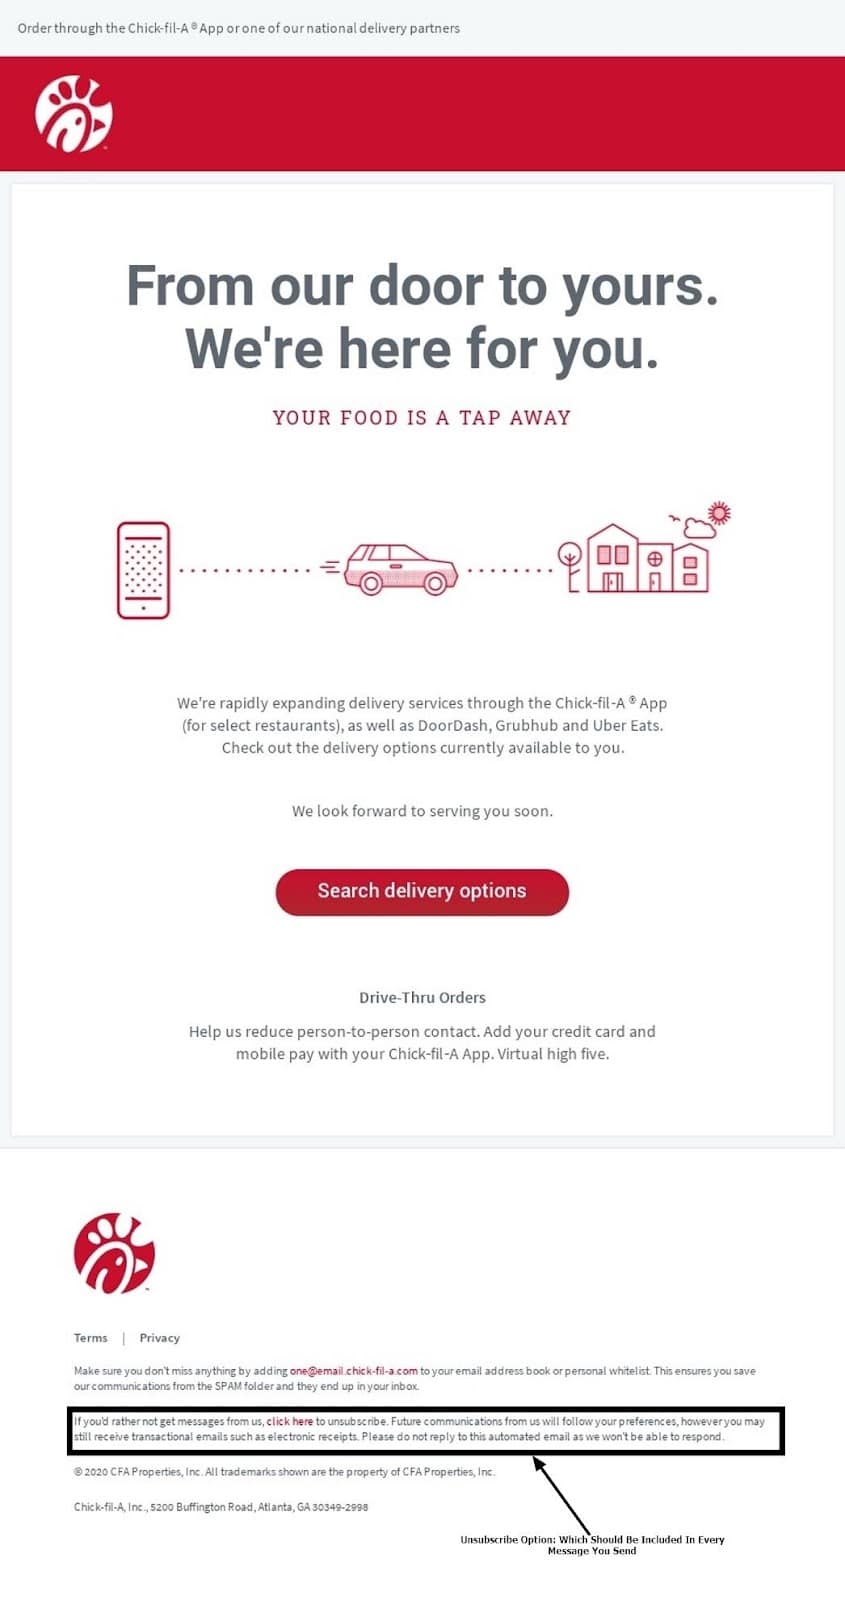 Chick fil a subscribe and unsubscribe options